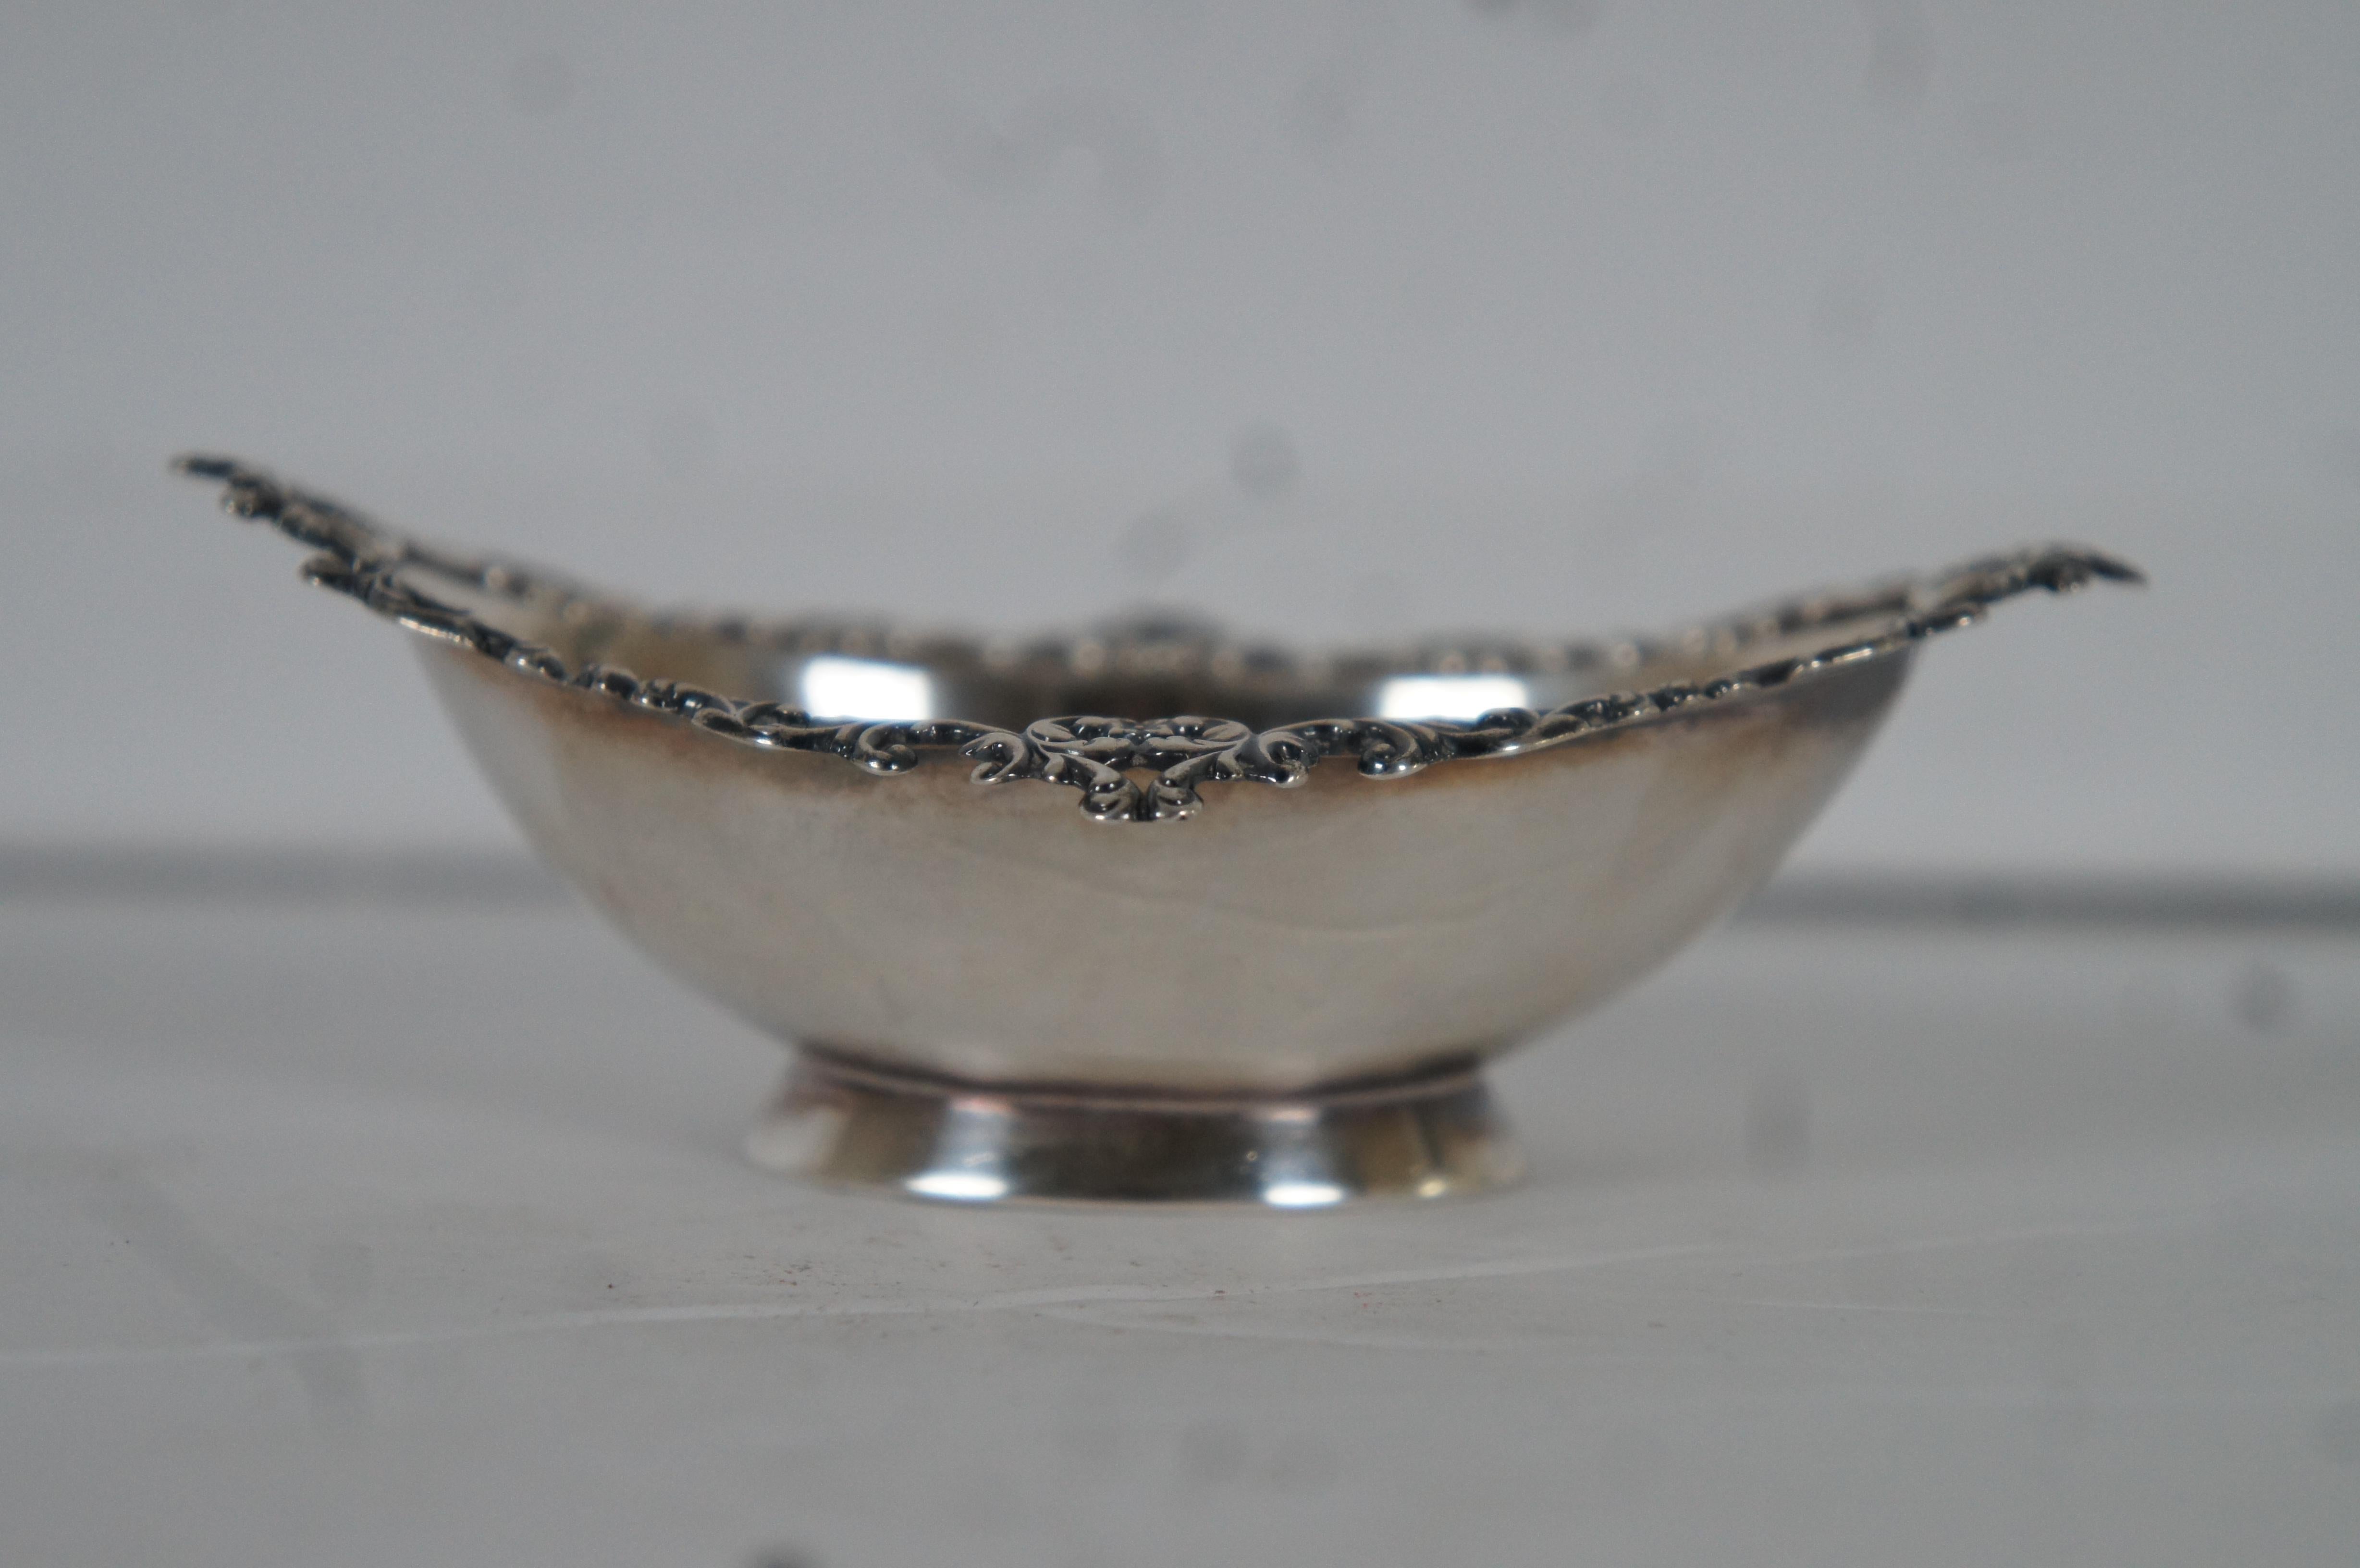 Antique Galt & Bro 72 Baroque Sterling Silver Footed Bowl Compote Nut Dish 45g 3